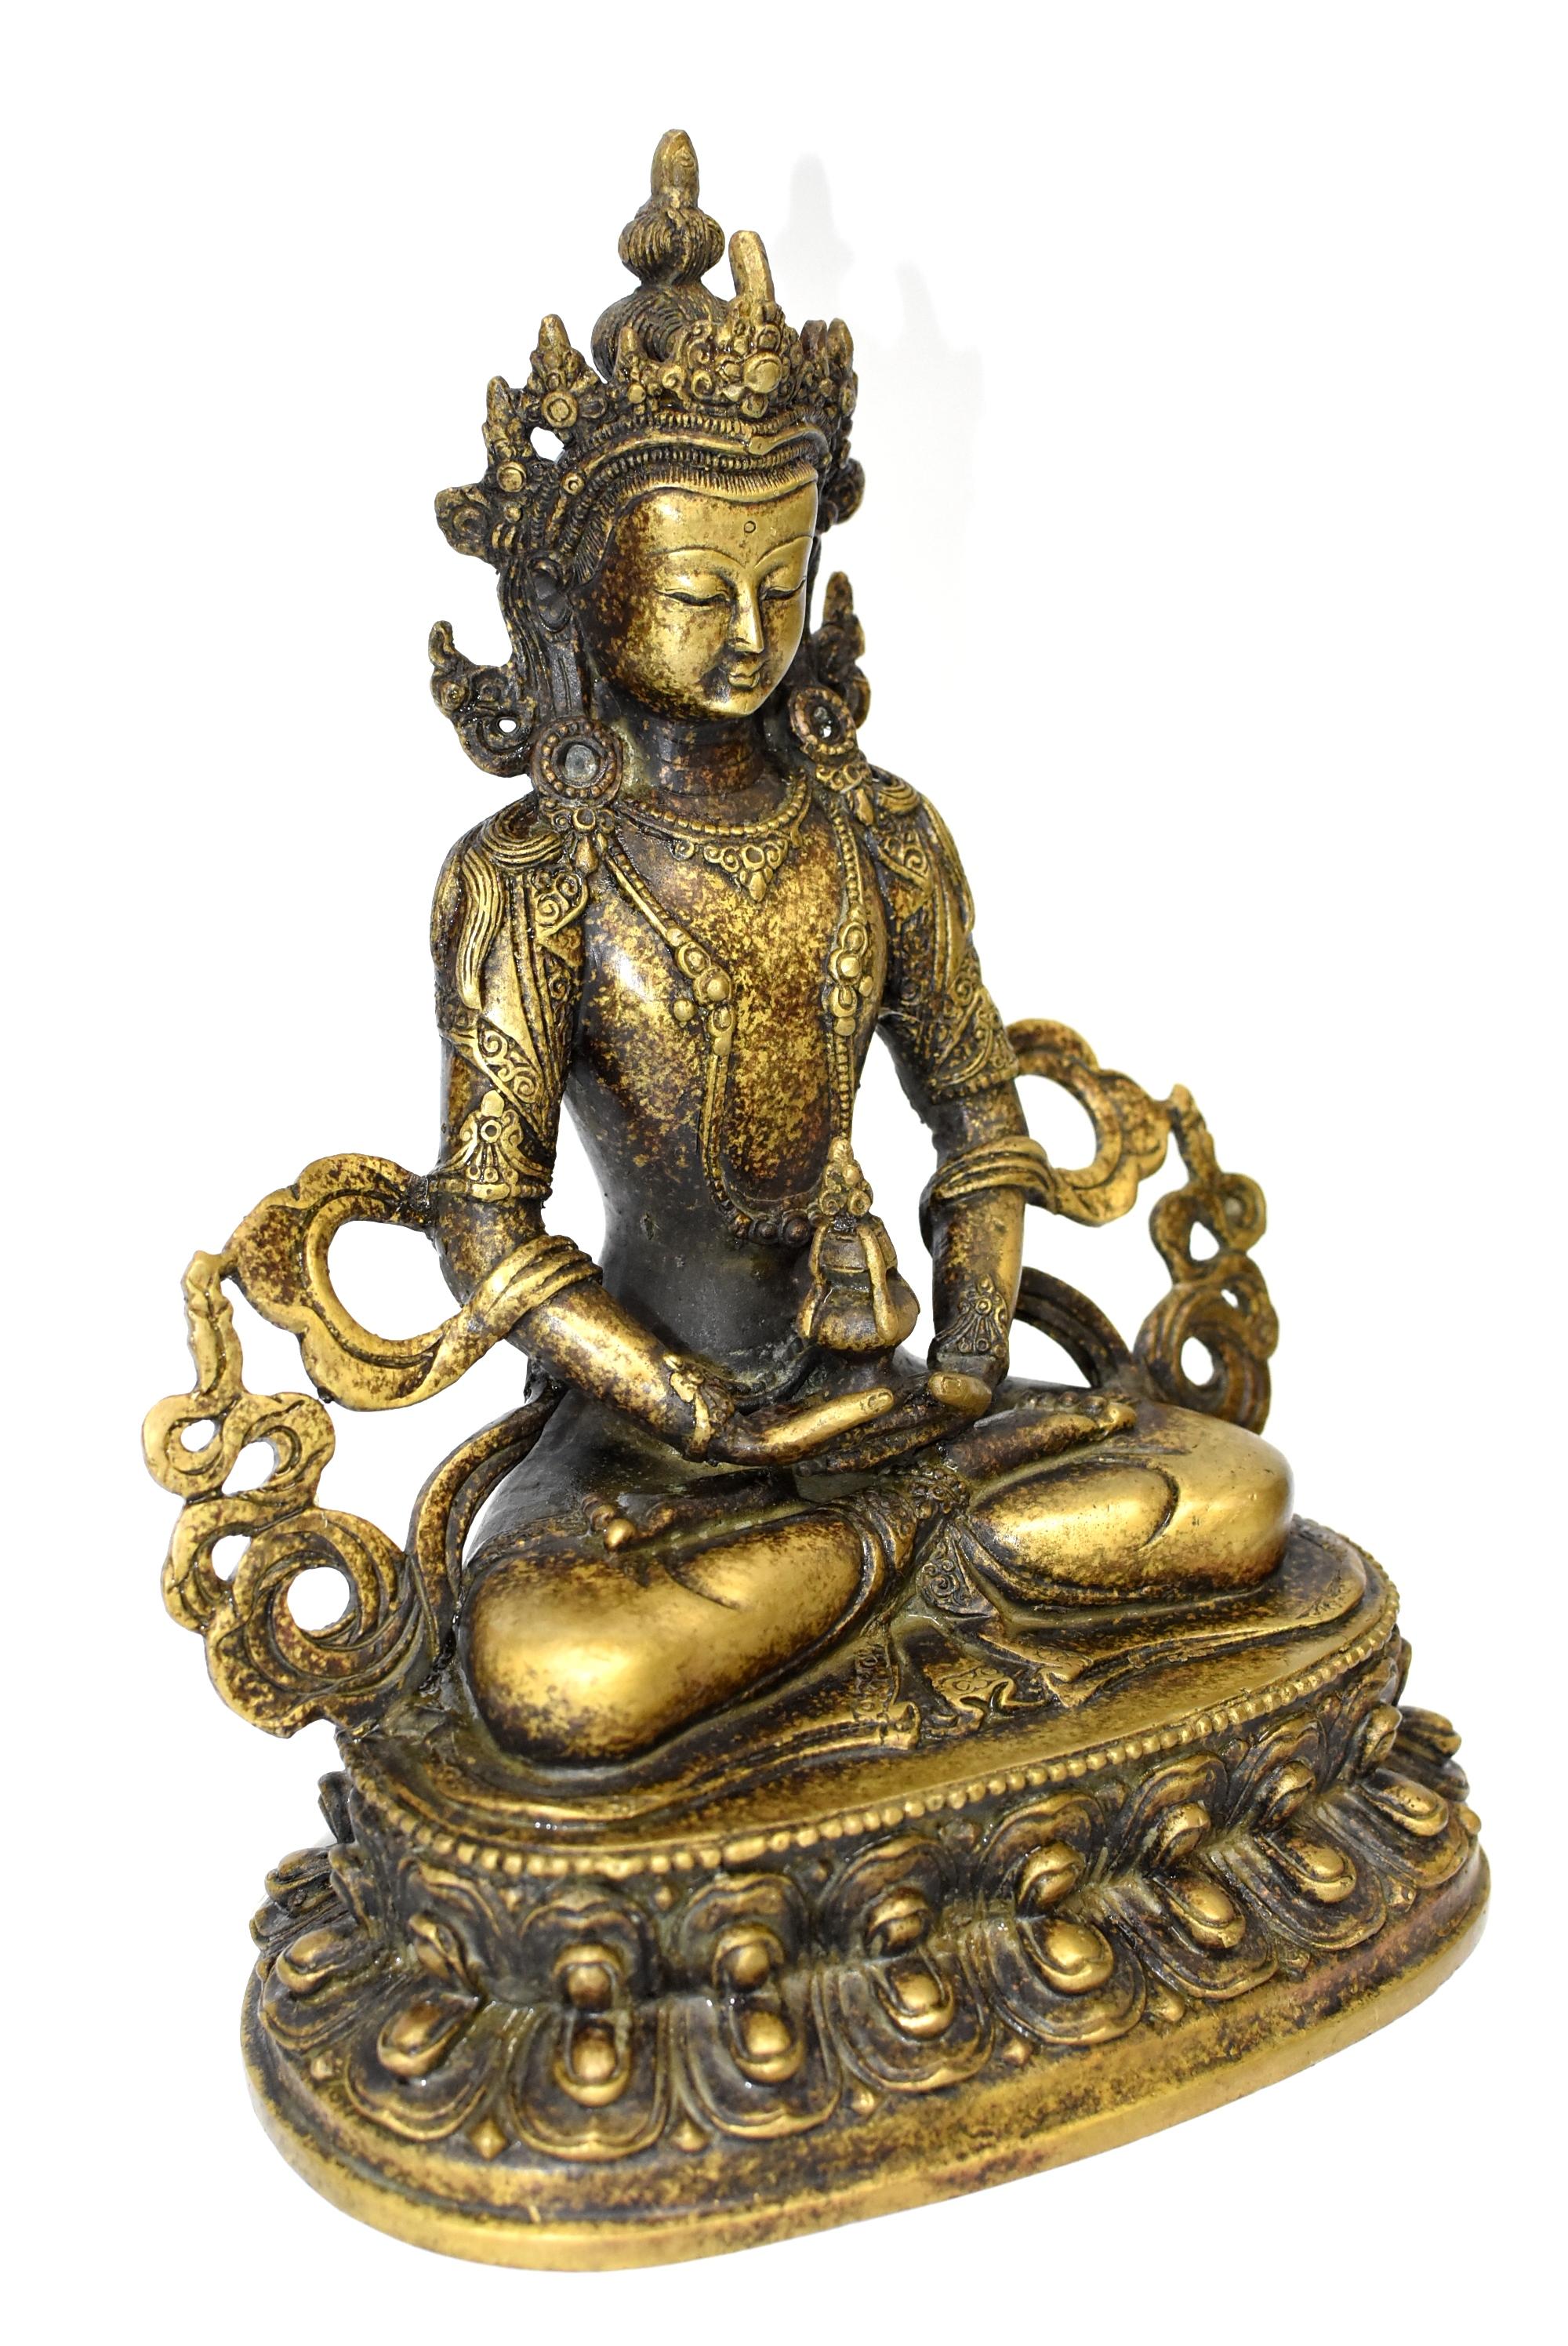 A beautiful, large, gold finish bronze sculpture of Amitayus Buddha. The god of longevity, he brings blessings of long life. Fully adorned with necklaces, cuffs, crown and sashes decorated with rosettes, pearls and medallions. Refined facial feature